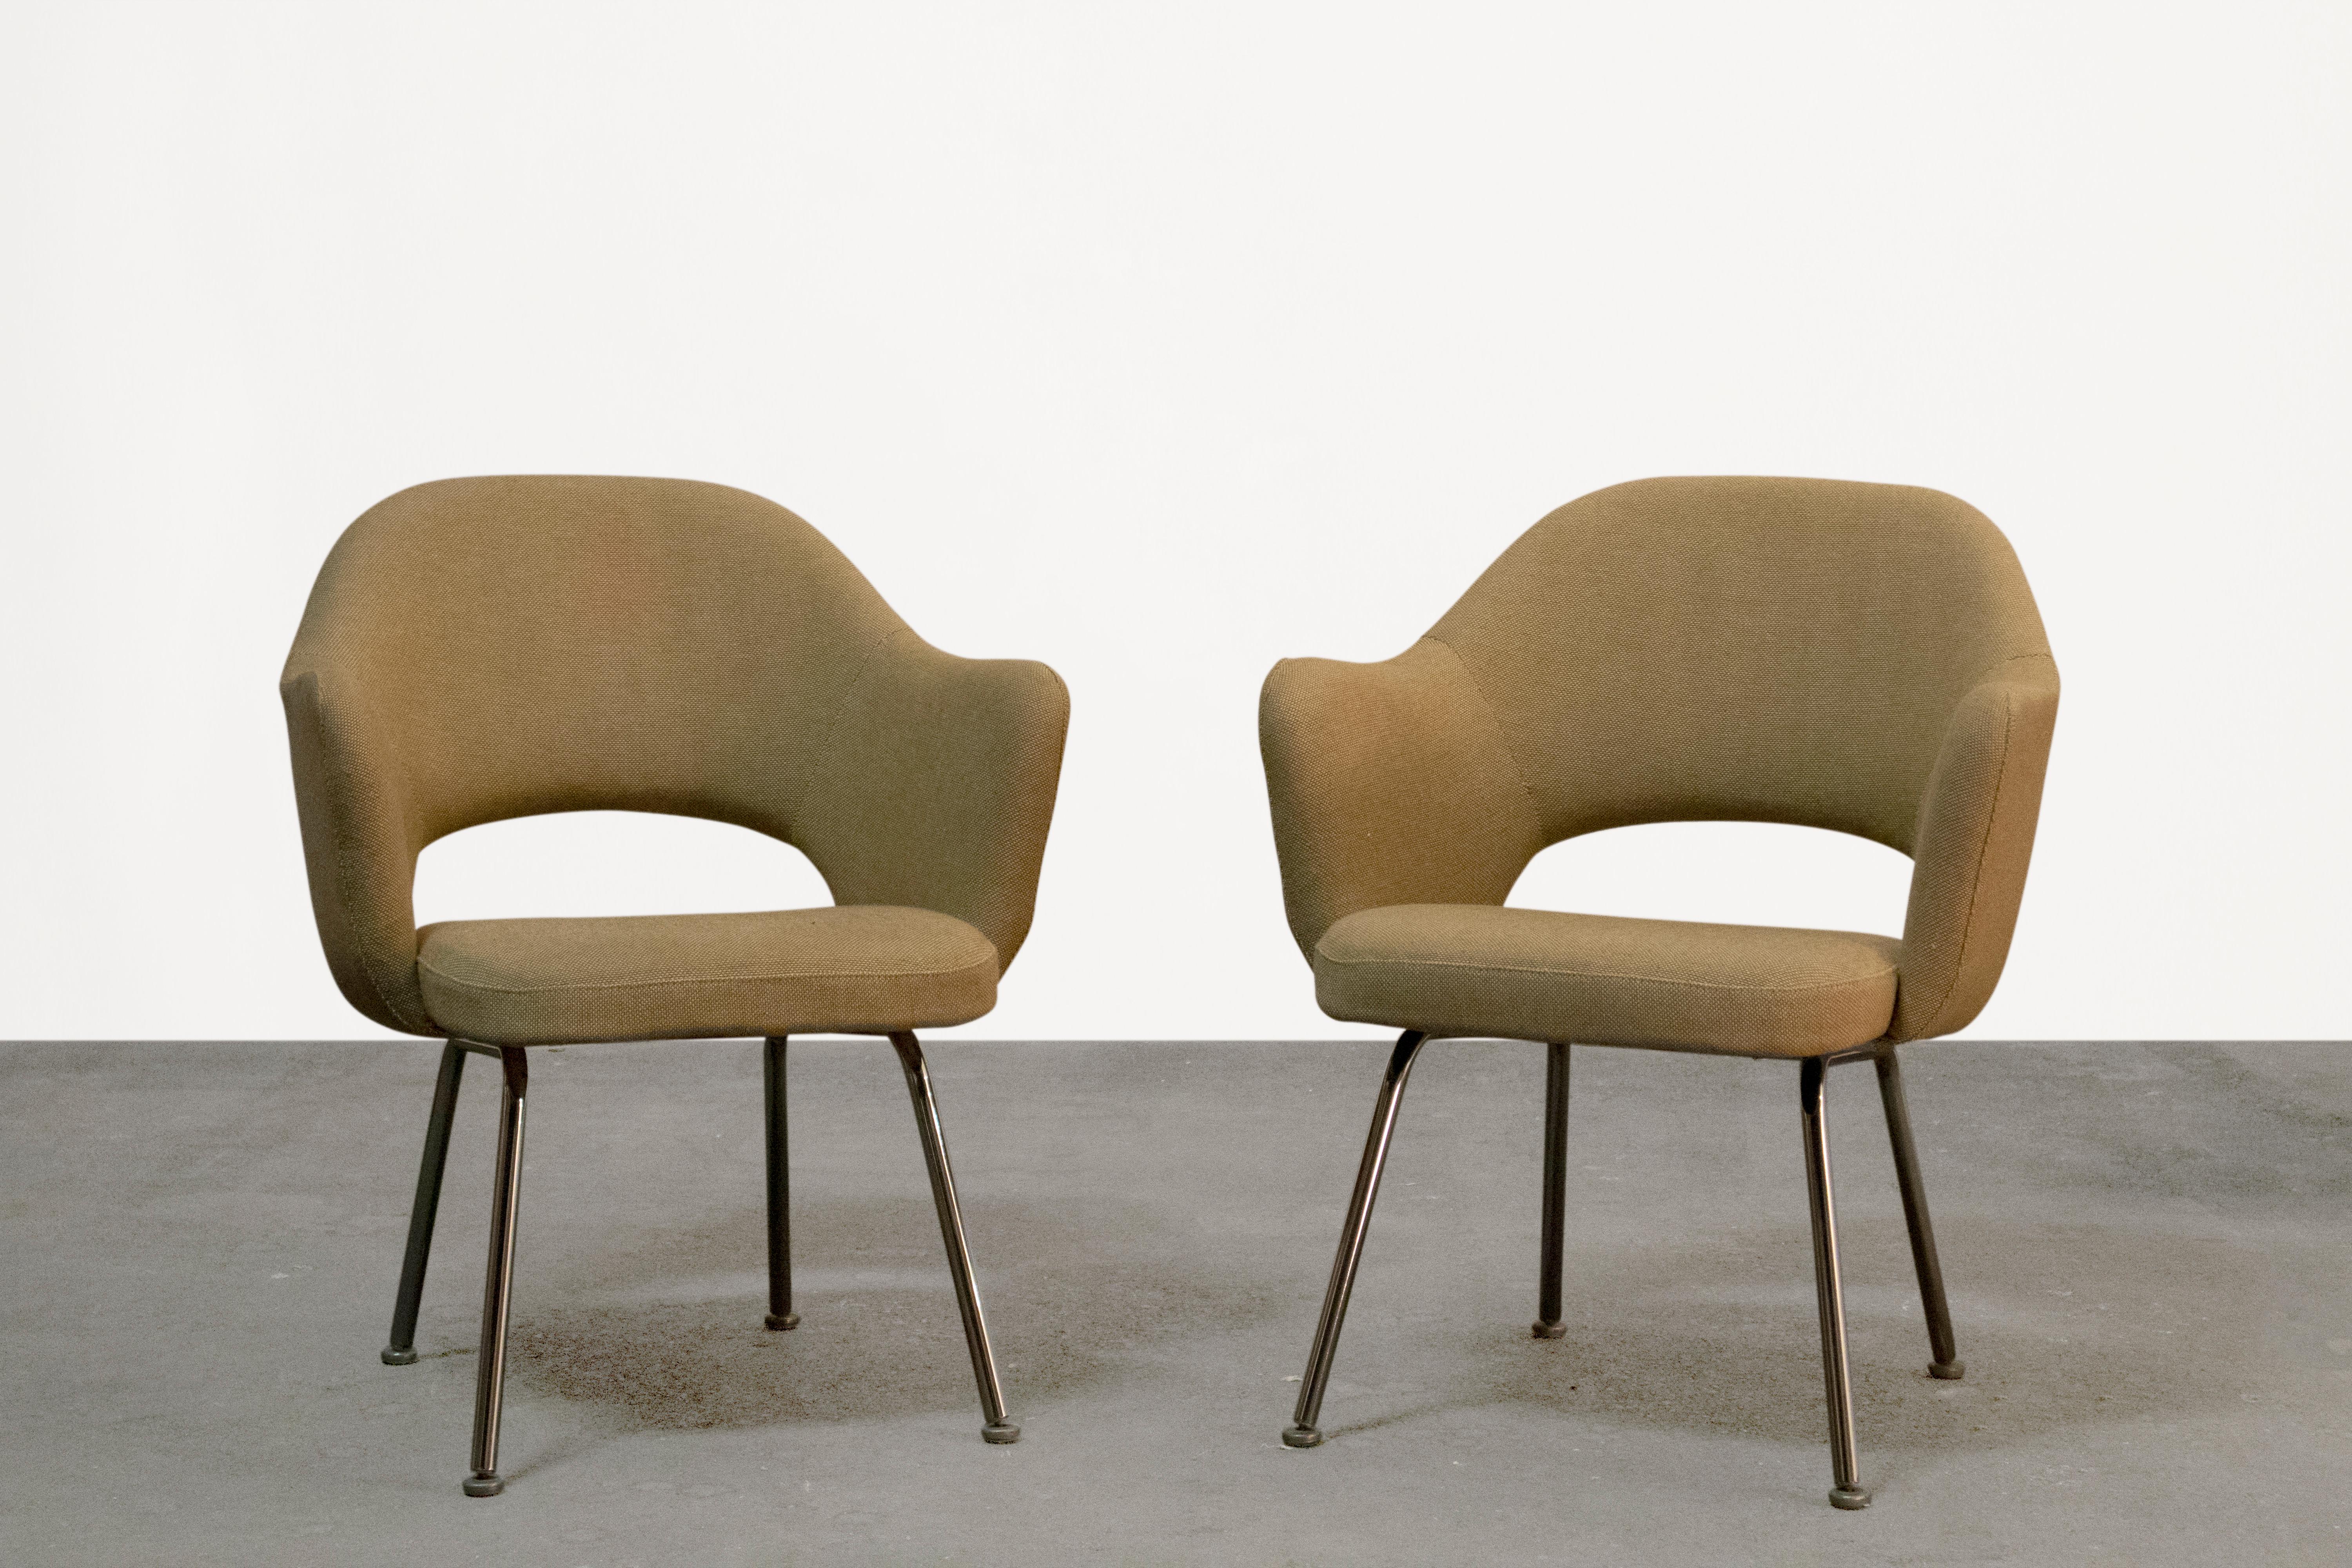 Enhance your space with this timeless pair of Mid-Century Organic Modern Executive Armchairs by renowned designer Eero Saarinen for Knoll. These iconic chairs feature a classic 4-leg chromed tube steel base and comfortable armrests.

With their